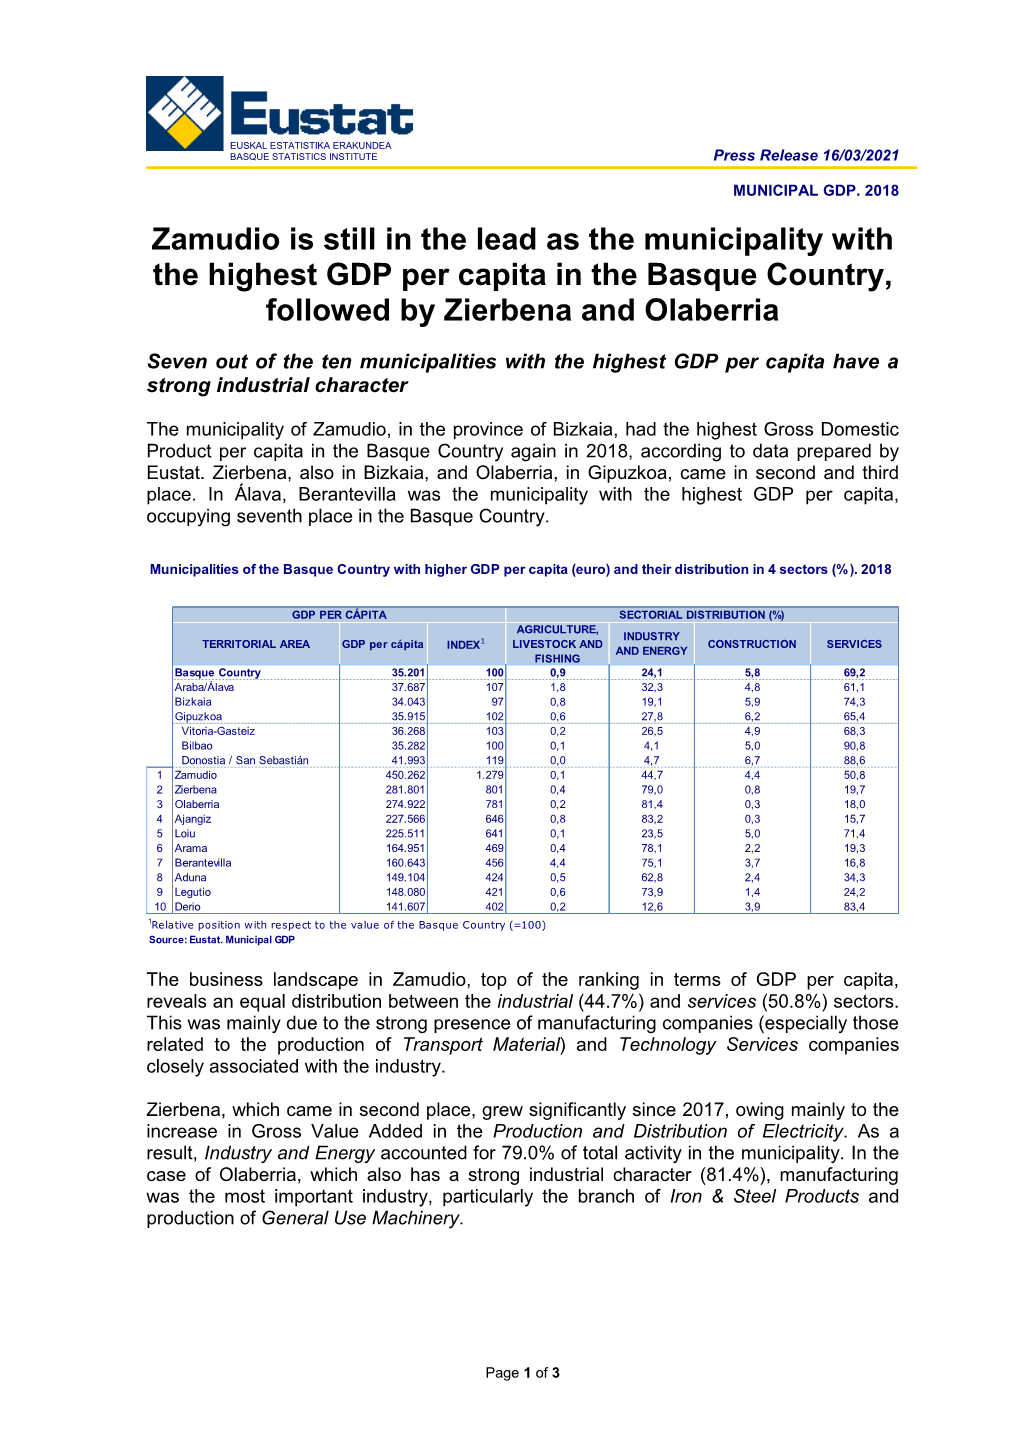 MUNICIPAL GDP. 2018. Zamudio Is Still in the Lead As The